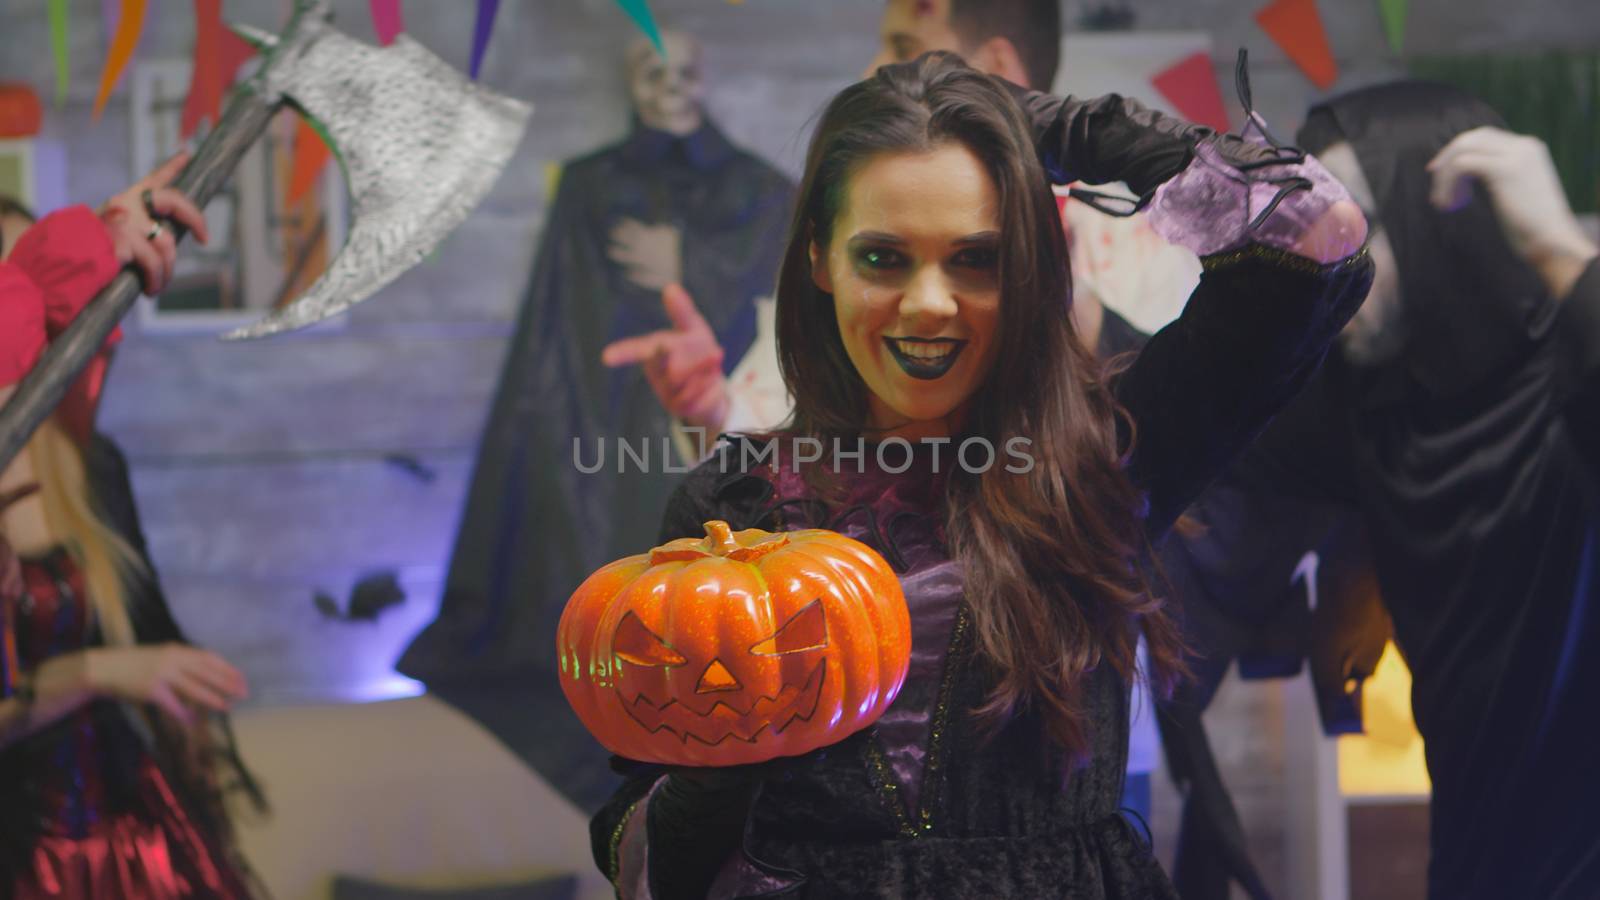 Spooky witch celebrating halloween with her friends dressed up like different scary monsters in decorated room